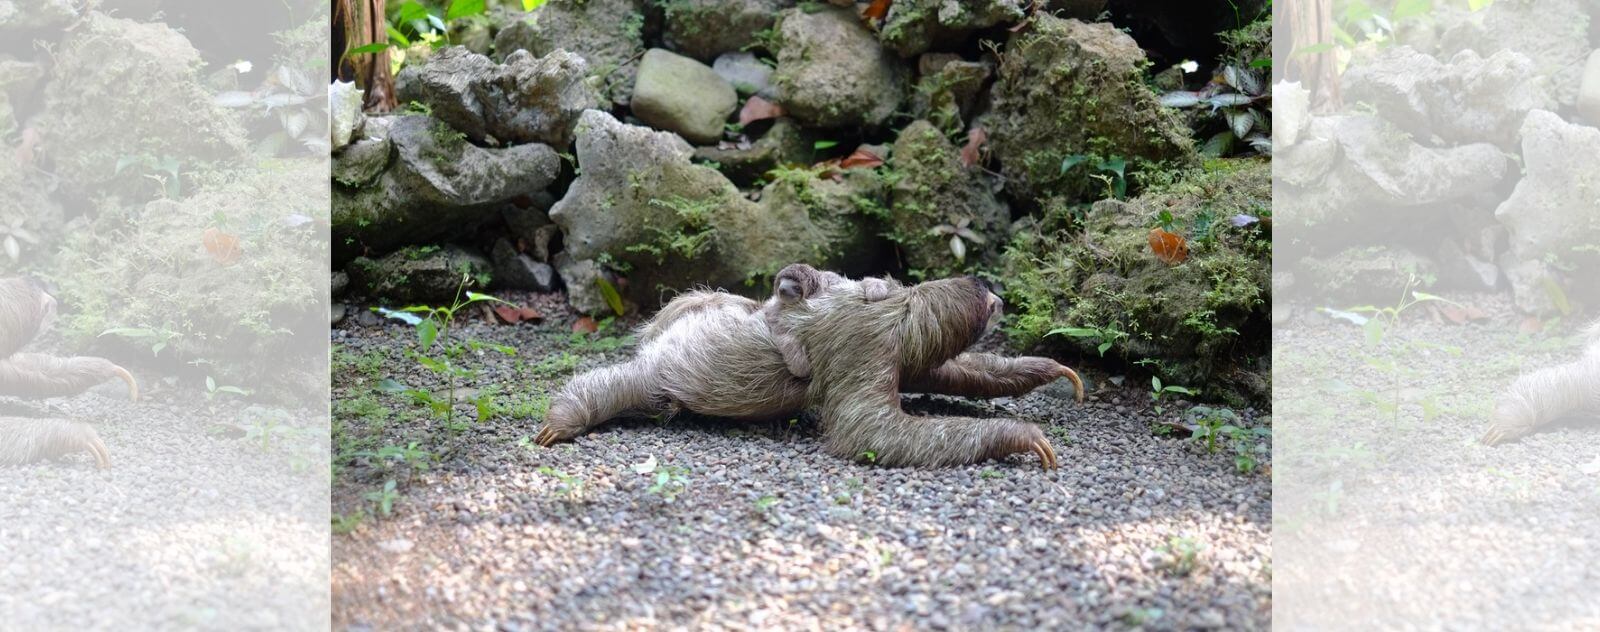 Sloth with her Baby on her Back